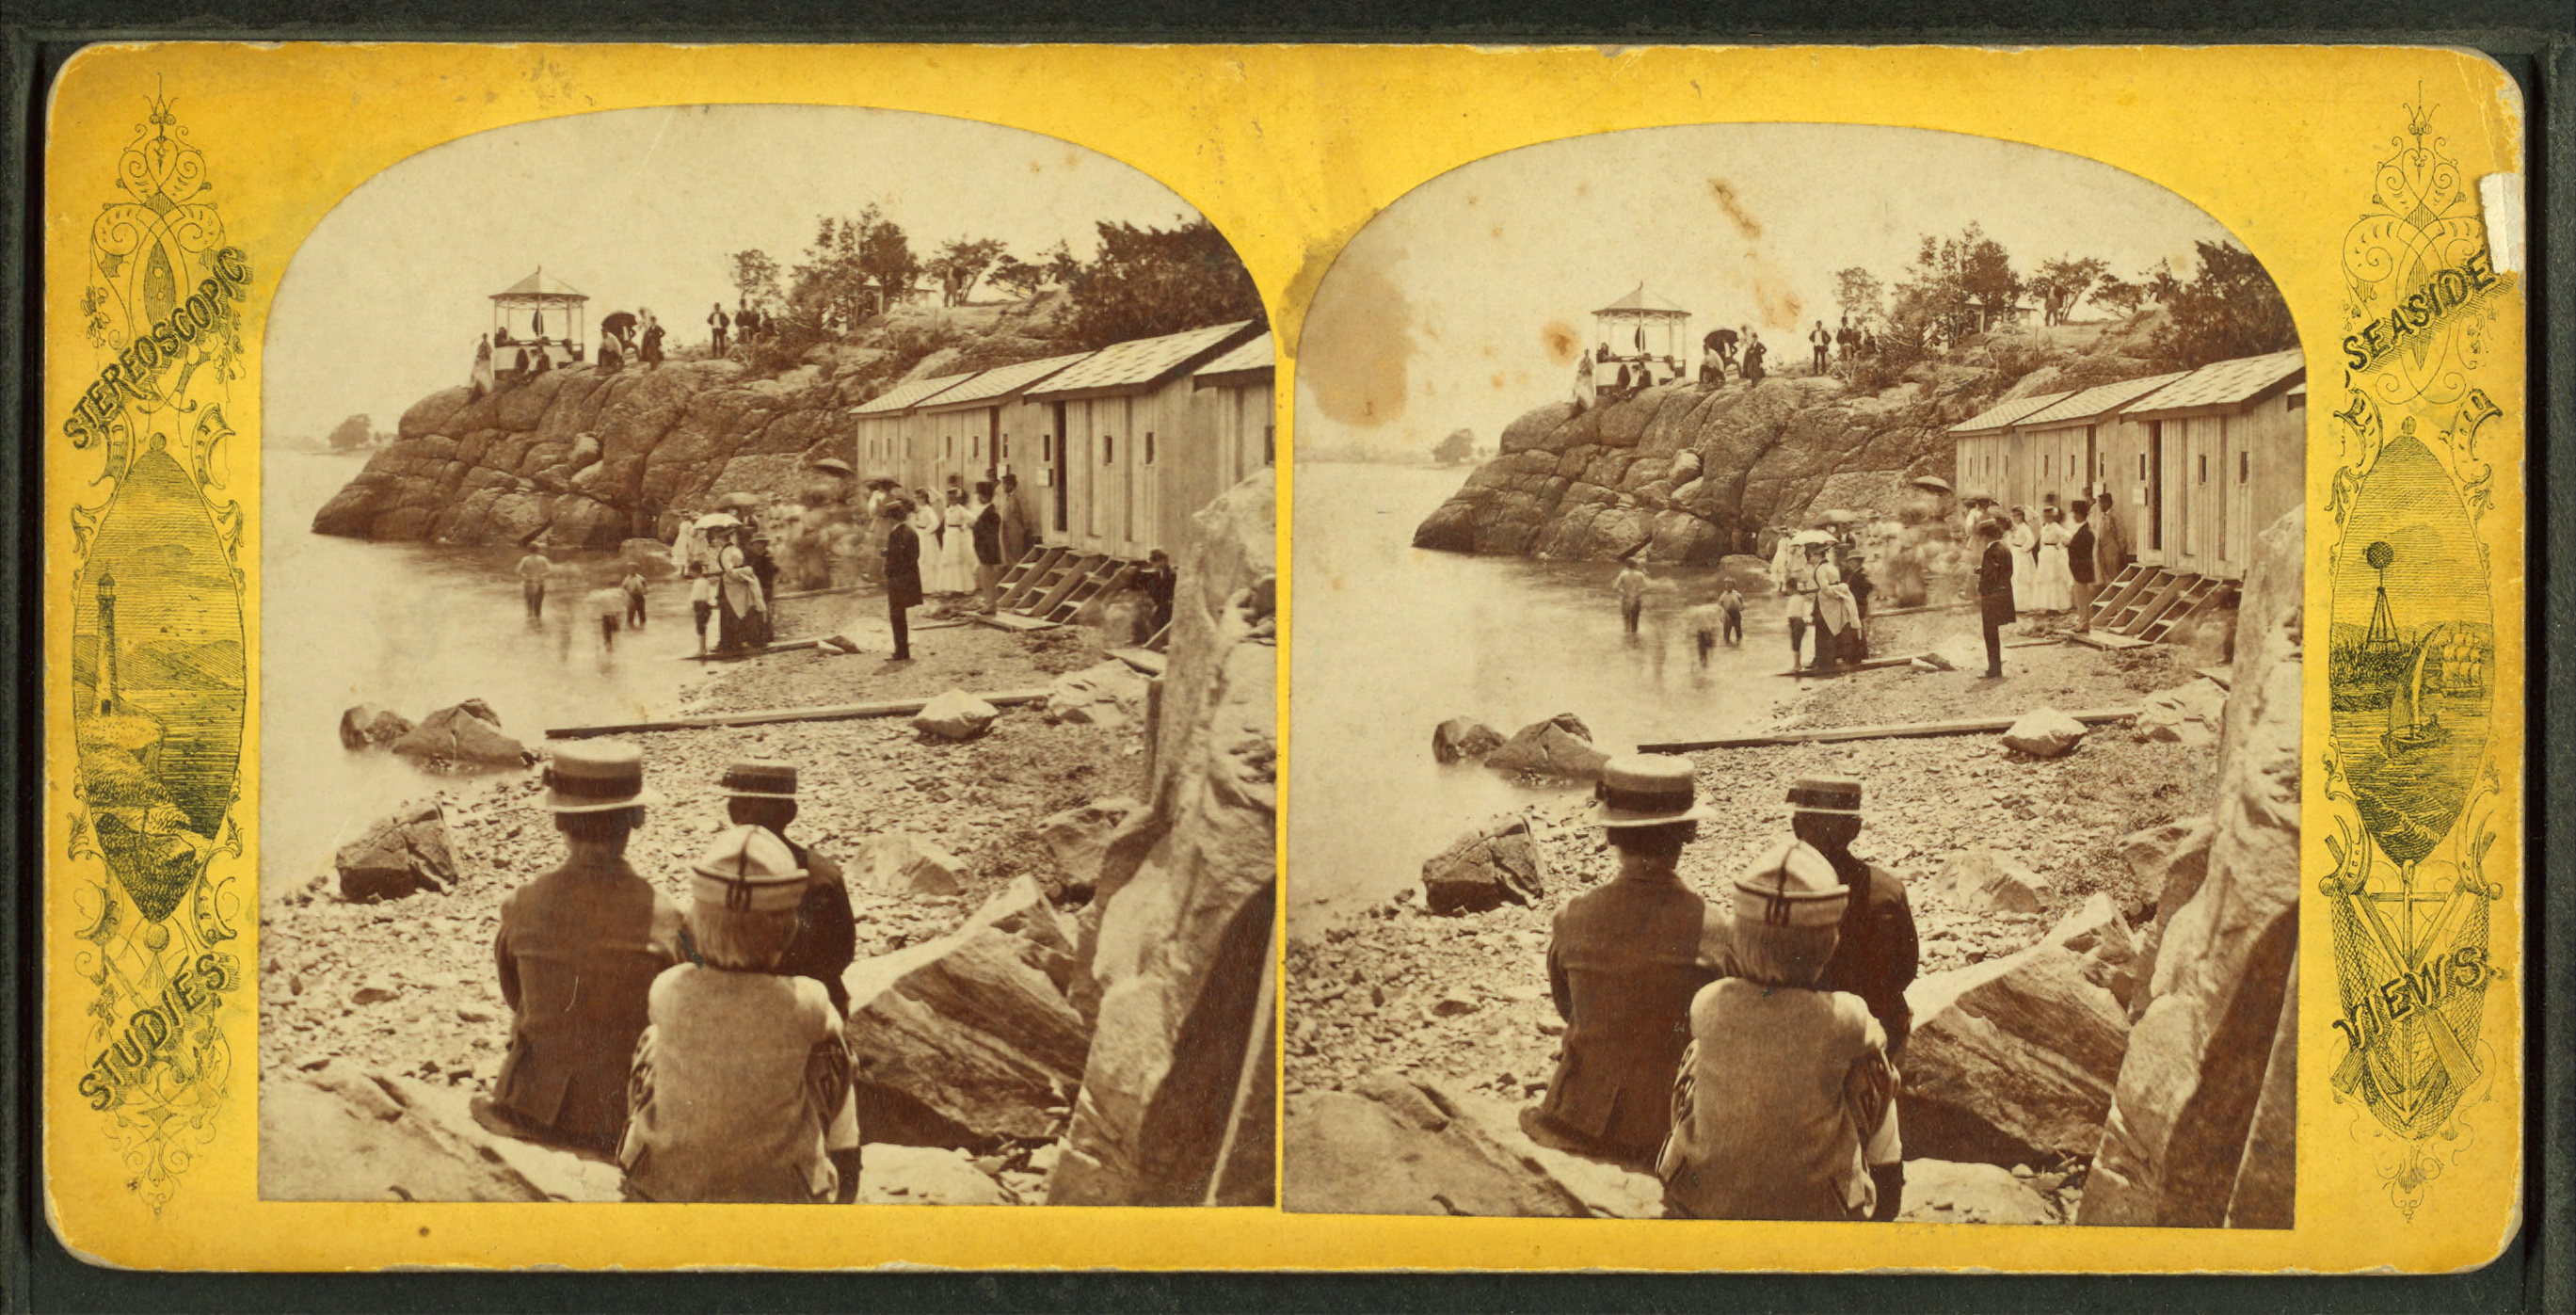 Bathing houses, from Robert N. Dennis collection of stereoscopic views